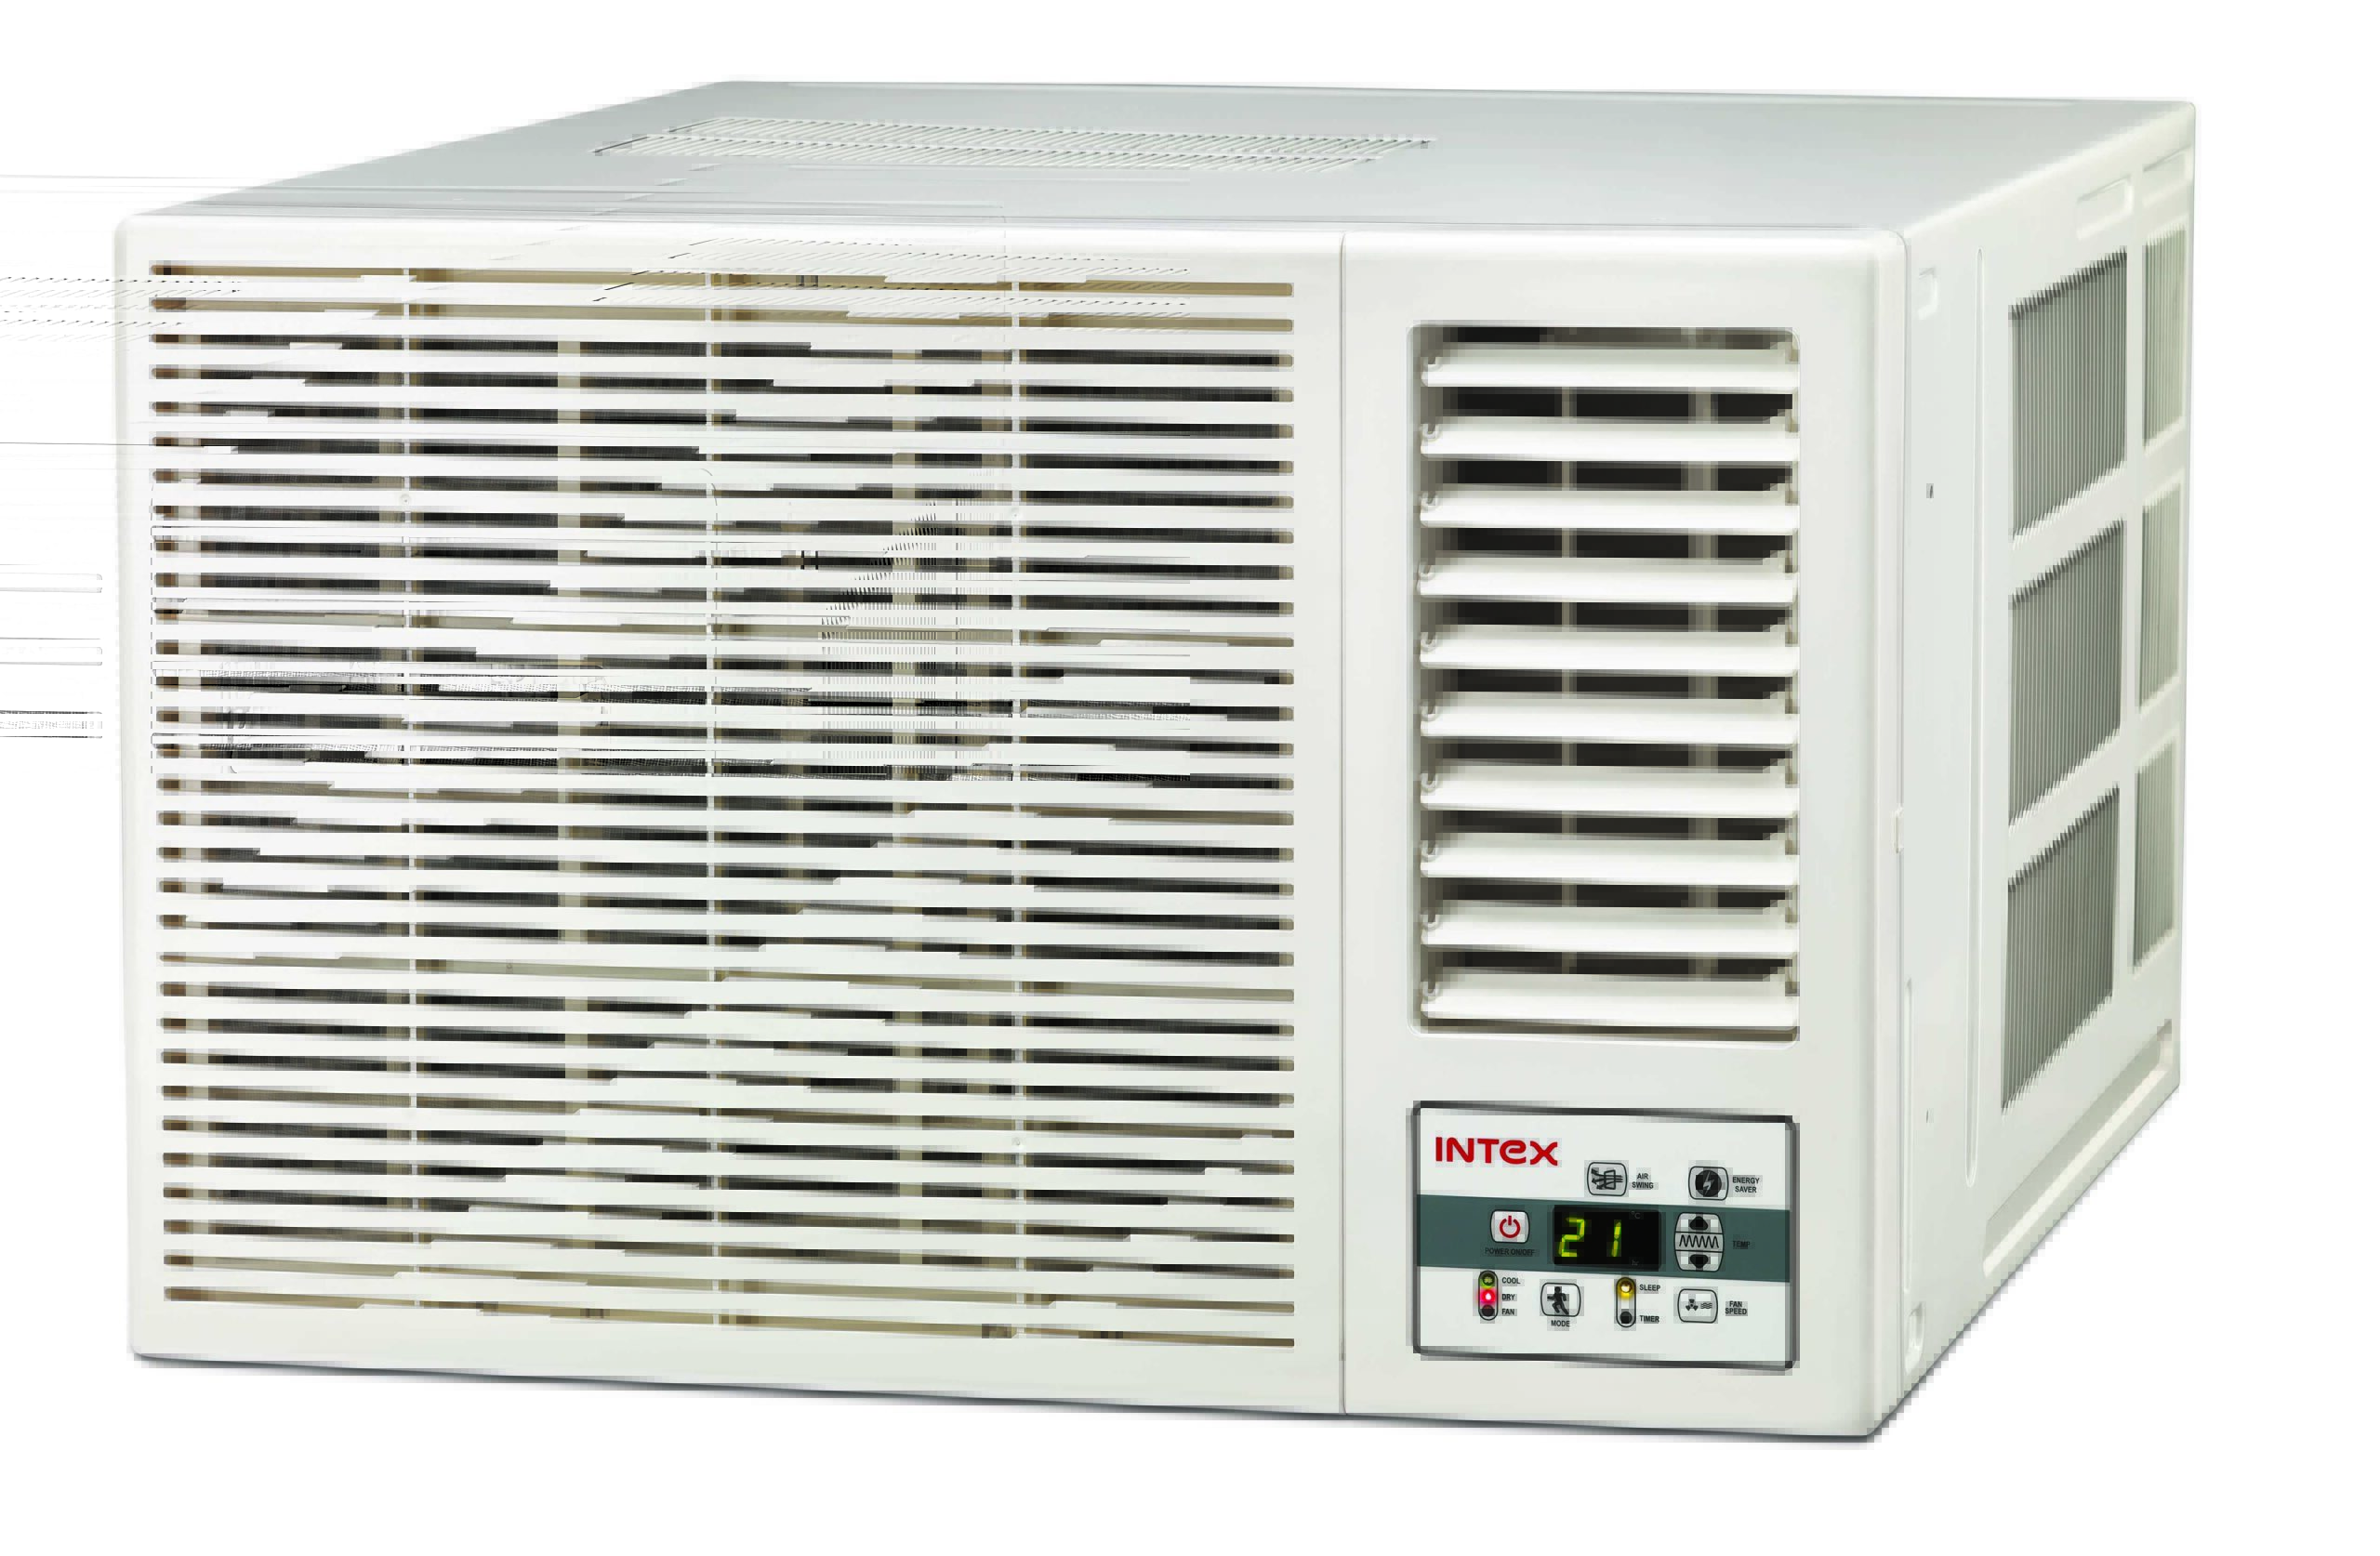 Intex Launches Air-Conditioners Dedicated to Homemakers